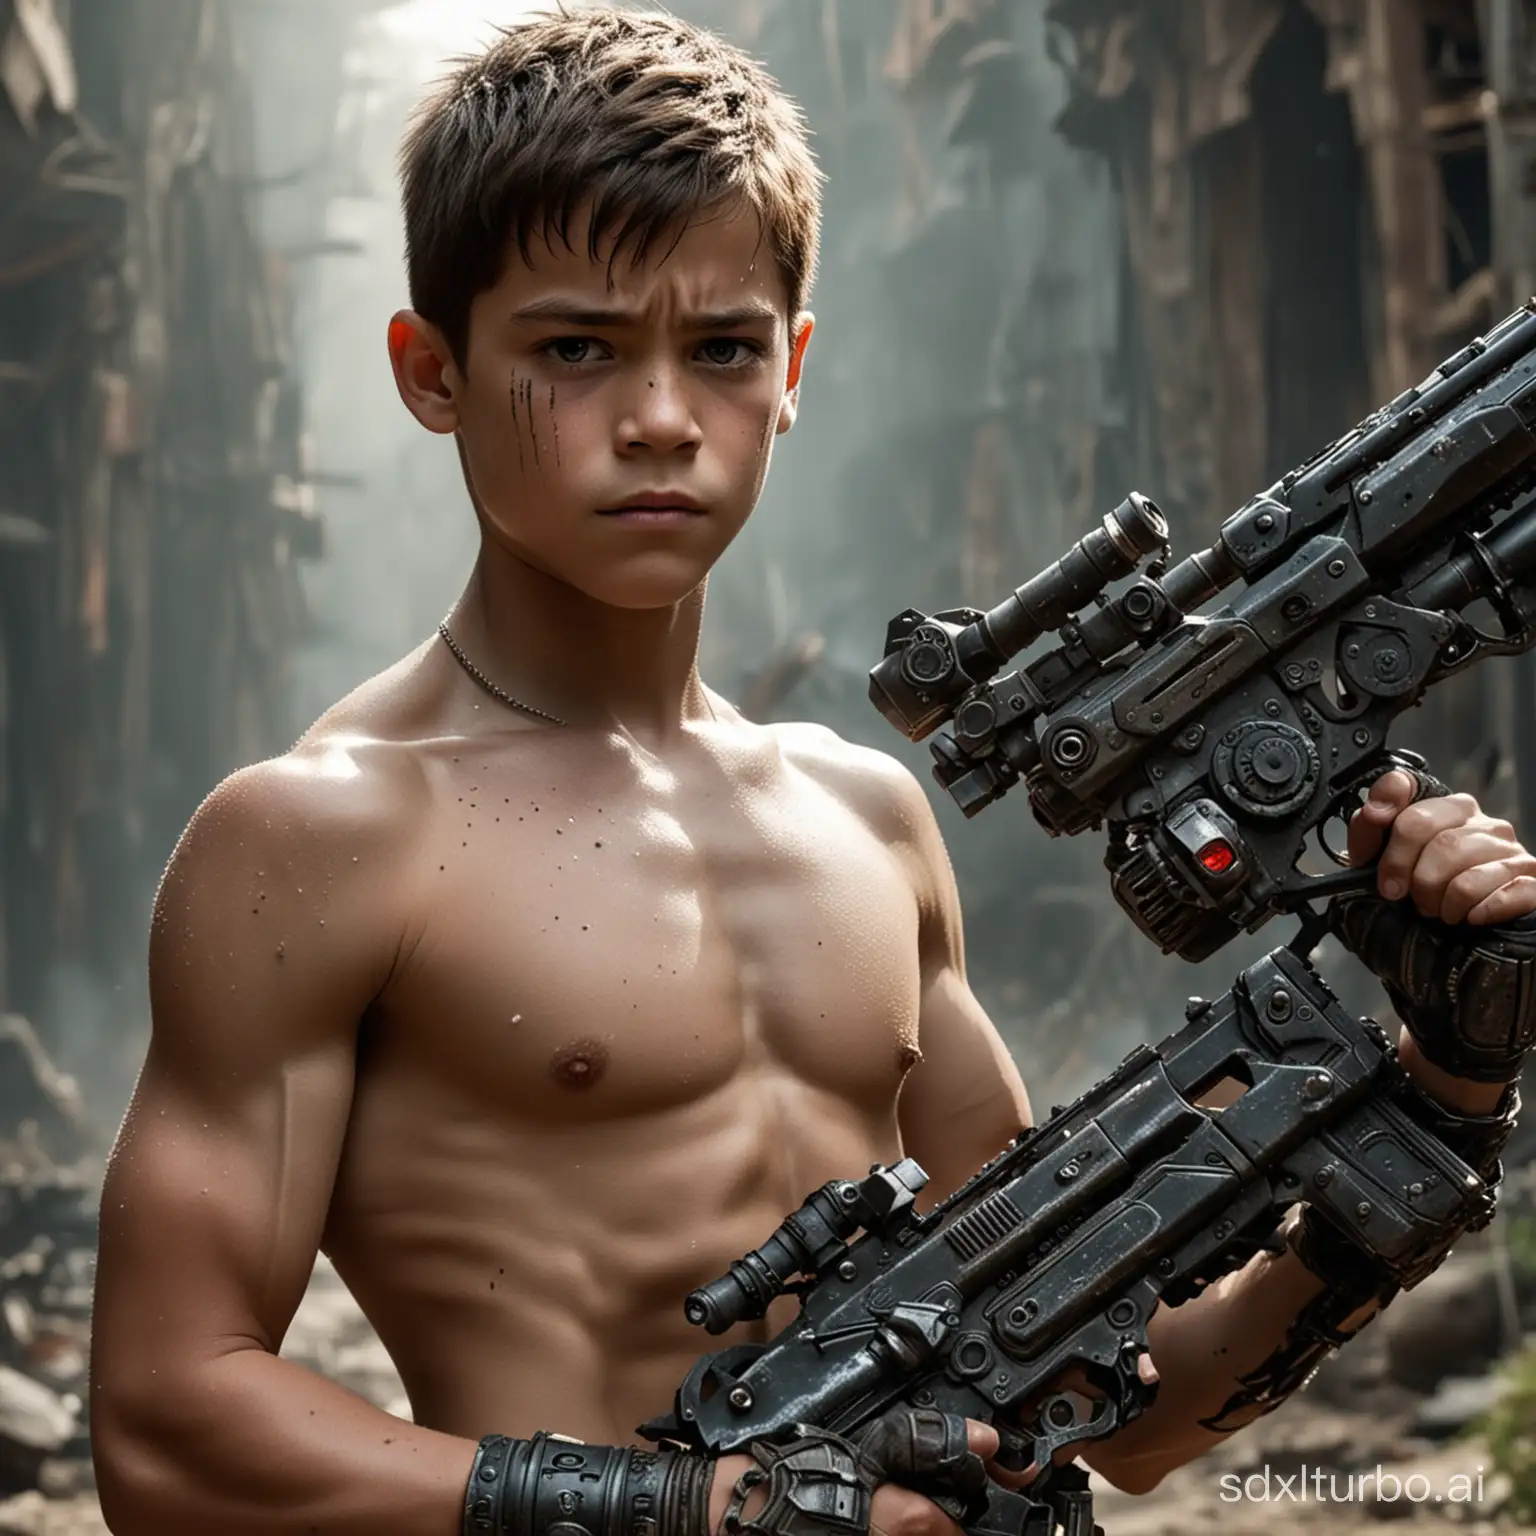 a picture of a muscular shirtless 12 years old bodybuilding huge chest, big muscular arms boy with a gun, preteen, from the tusk movie, still from the movie terminator, movie still of aztec cyborg, in foreground boy with shotgun, still from the movie predator, film still from god of war, movie still of cyborg, unicorn from the tusk movie, movie still of a cyborg, movie still of a cool cyborg, big biceps, big chest, about 12 years old, bodybuilding boy, 12 years old kid, shirtless, apocalyptic world, world war 12, destroyed planet earth, destroyed dark world